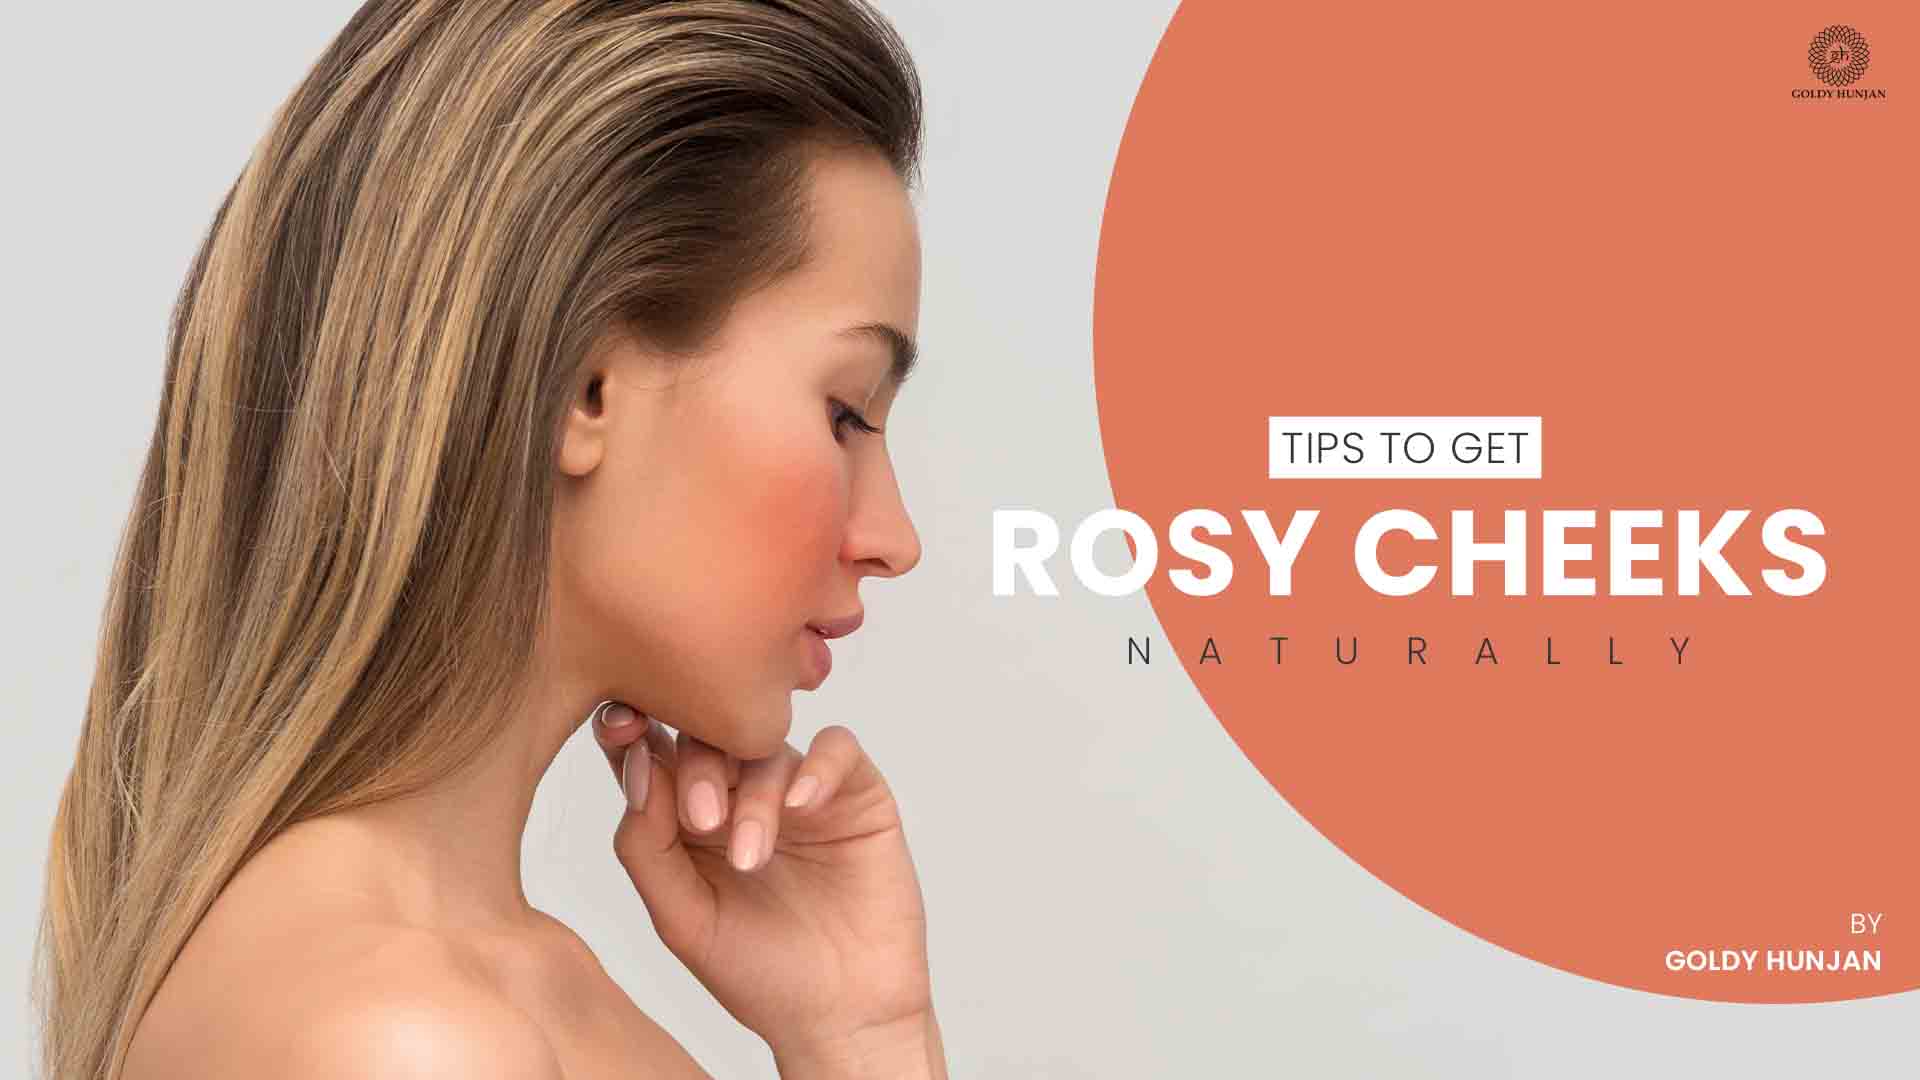 Tips to get rosy cheeks